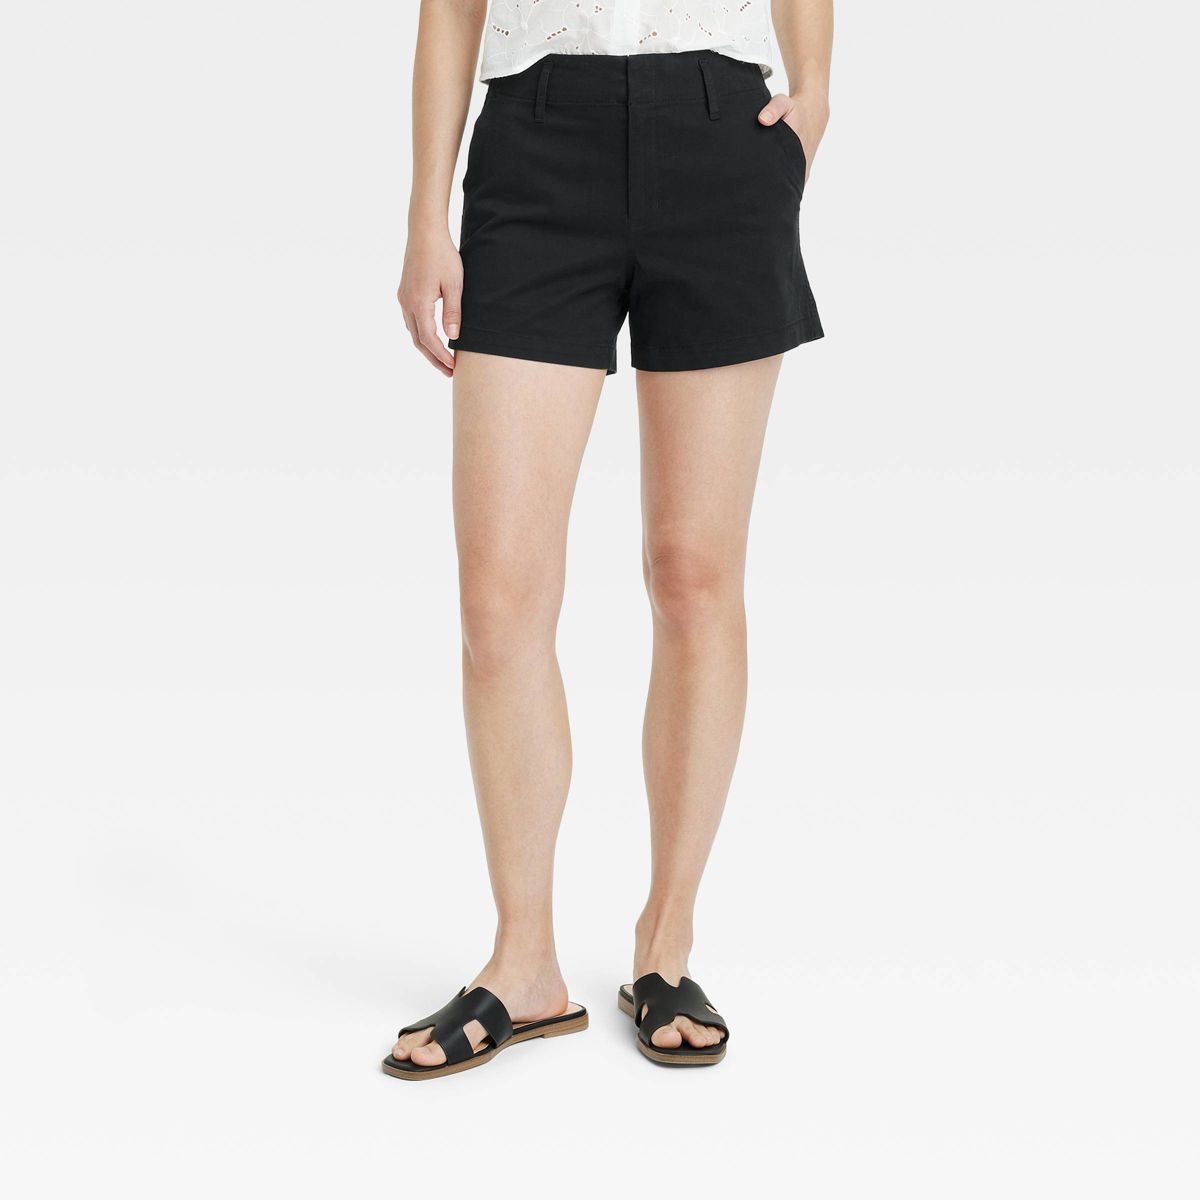 Women's High-Rise Everyday Chino Shorts - A New Day™ | Target